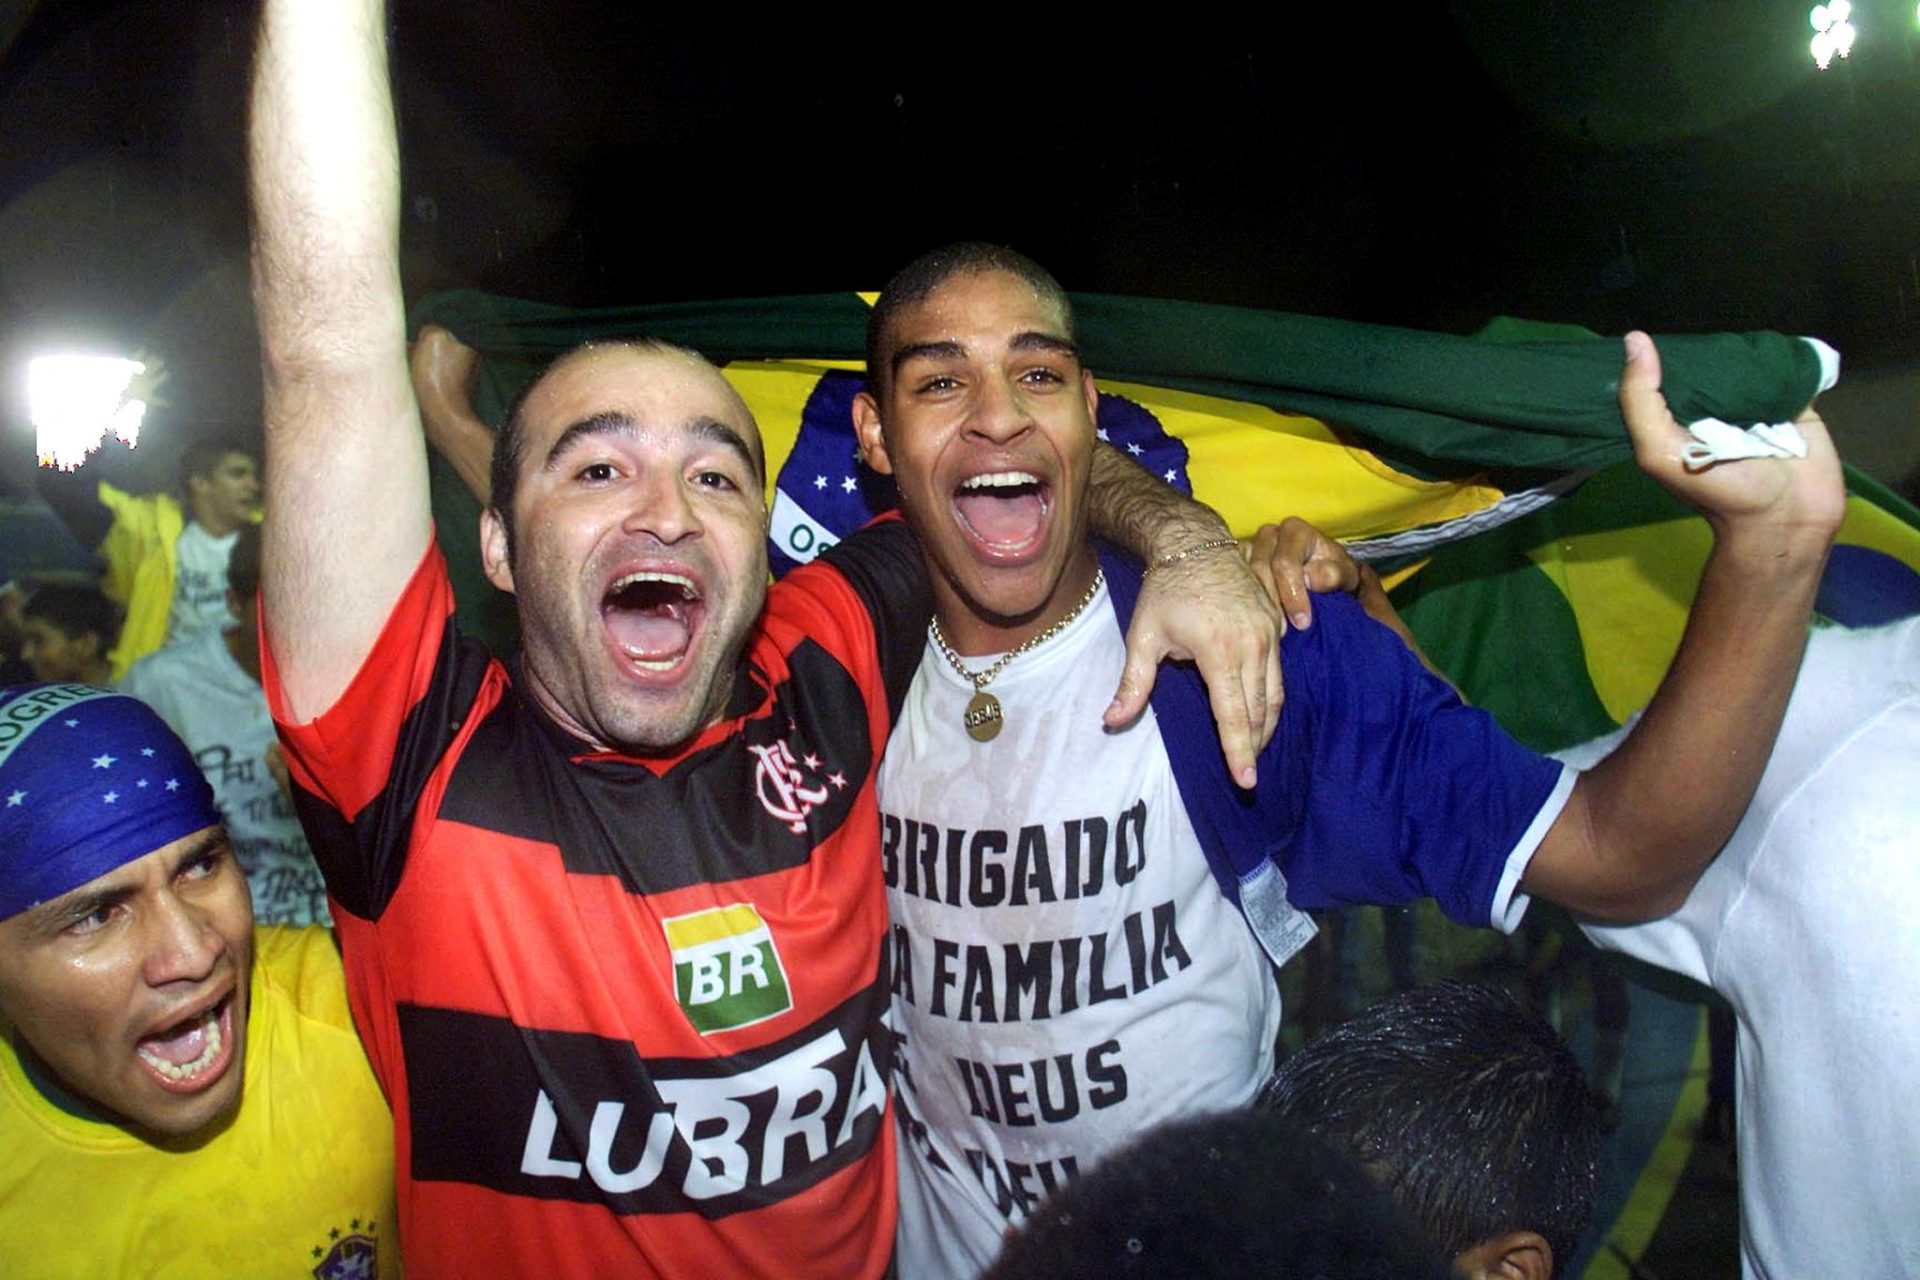 <p><span>His rise to prominence was rapid and he made his professional debut with Flamengo in 1999, aged just 17. In 2000, at the age of 18, he helped Flamengo win the Brazilian championship, scoring 19 goals in 31 games.</span></p>